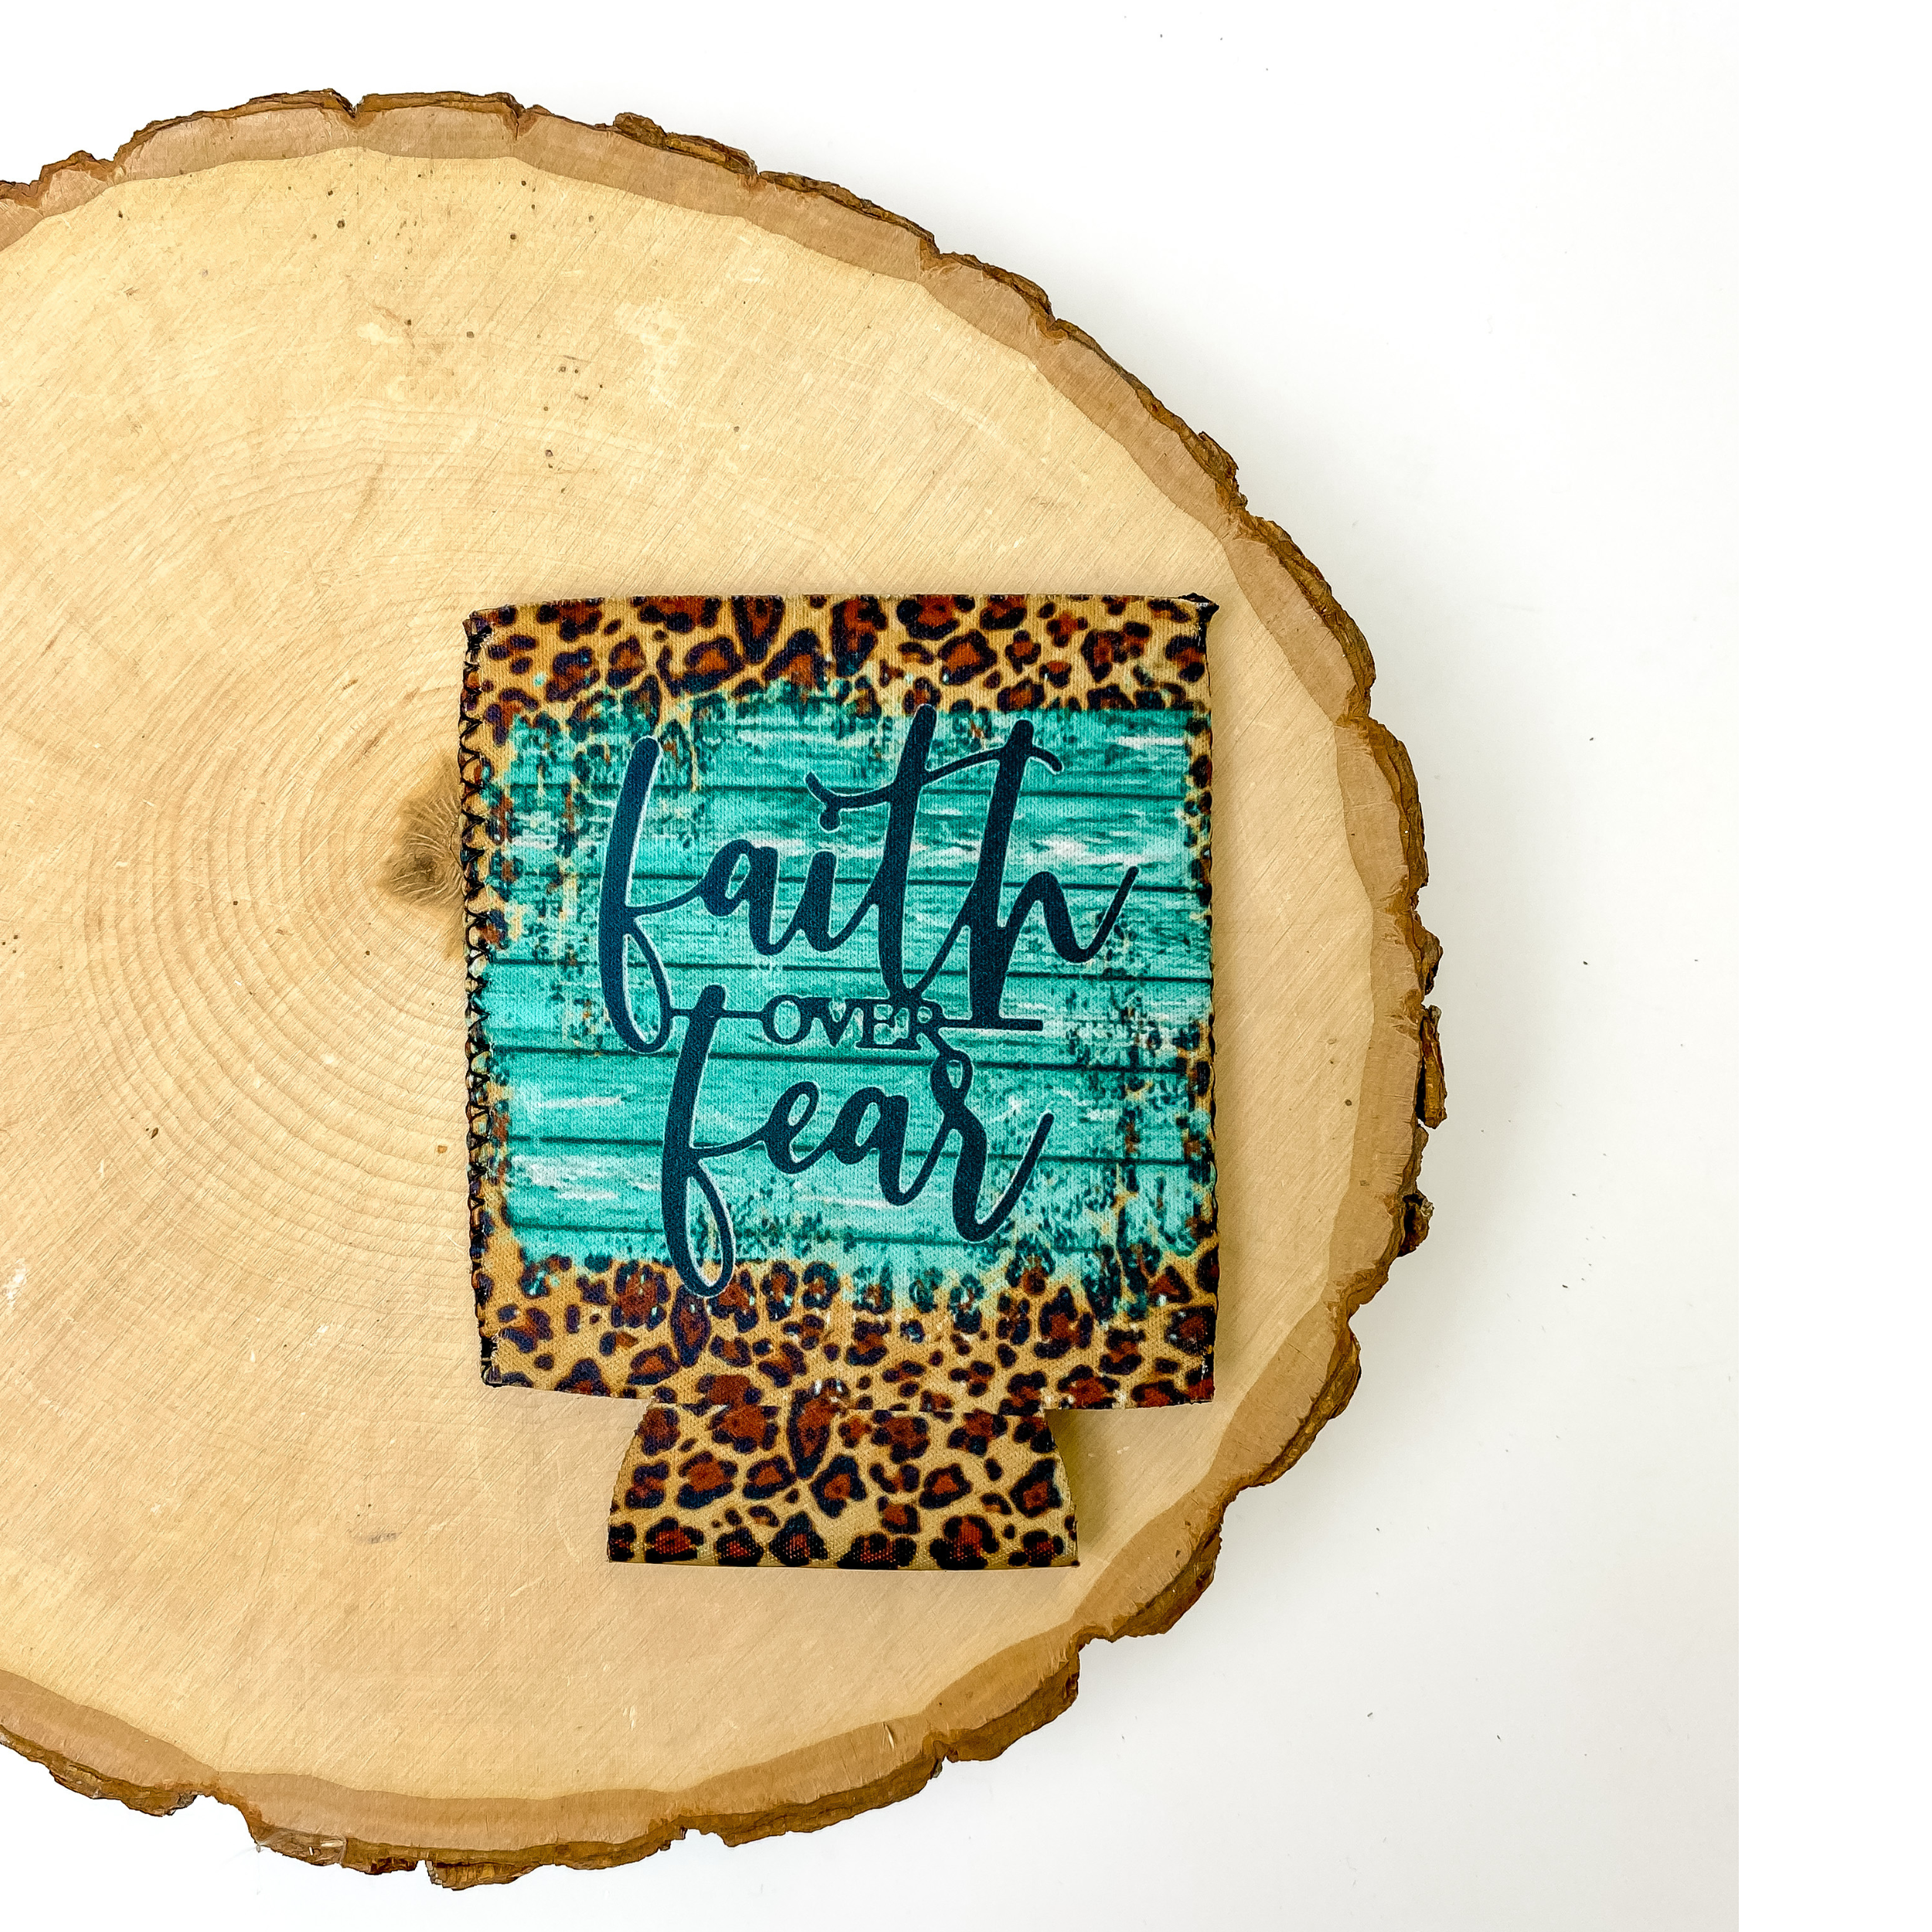 Koozie with the saying "Faith over fear" with turquoise and leopard print background. This koozie is pictured on a piece of wood on a white background.